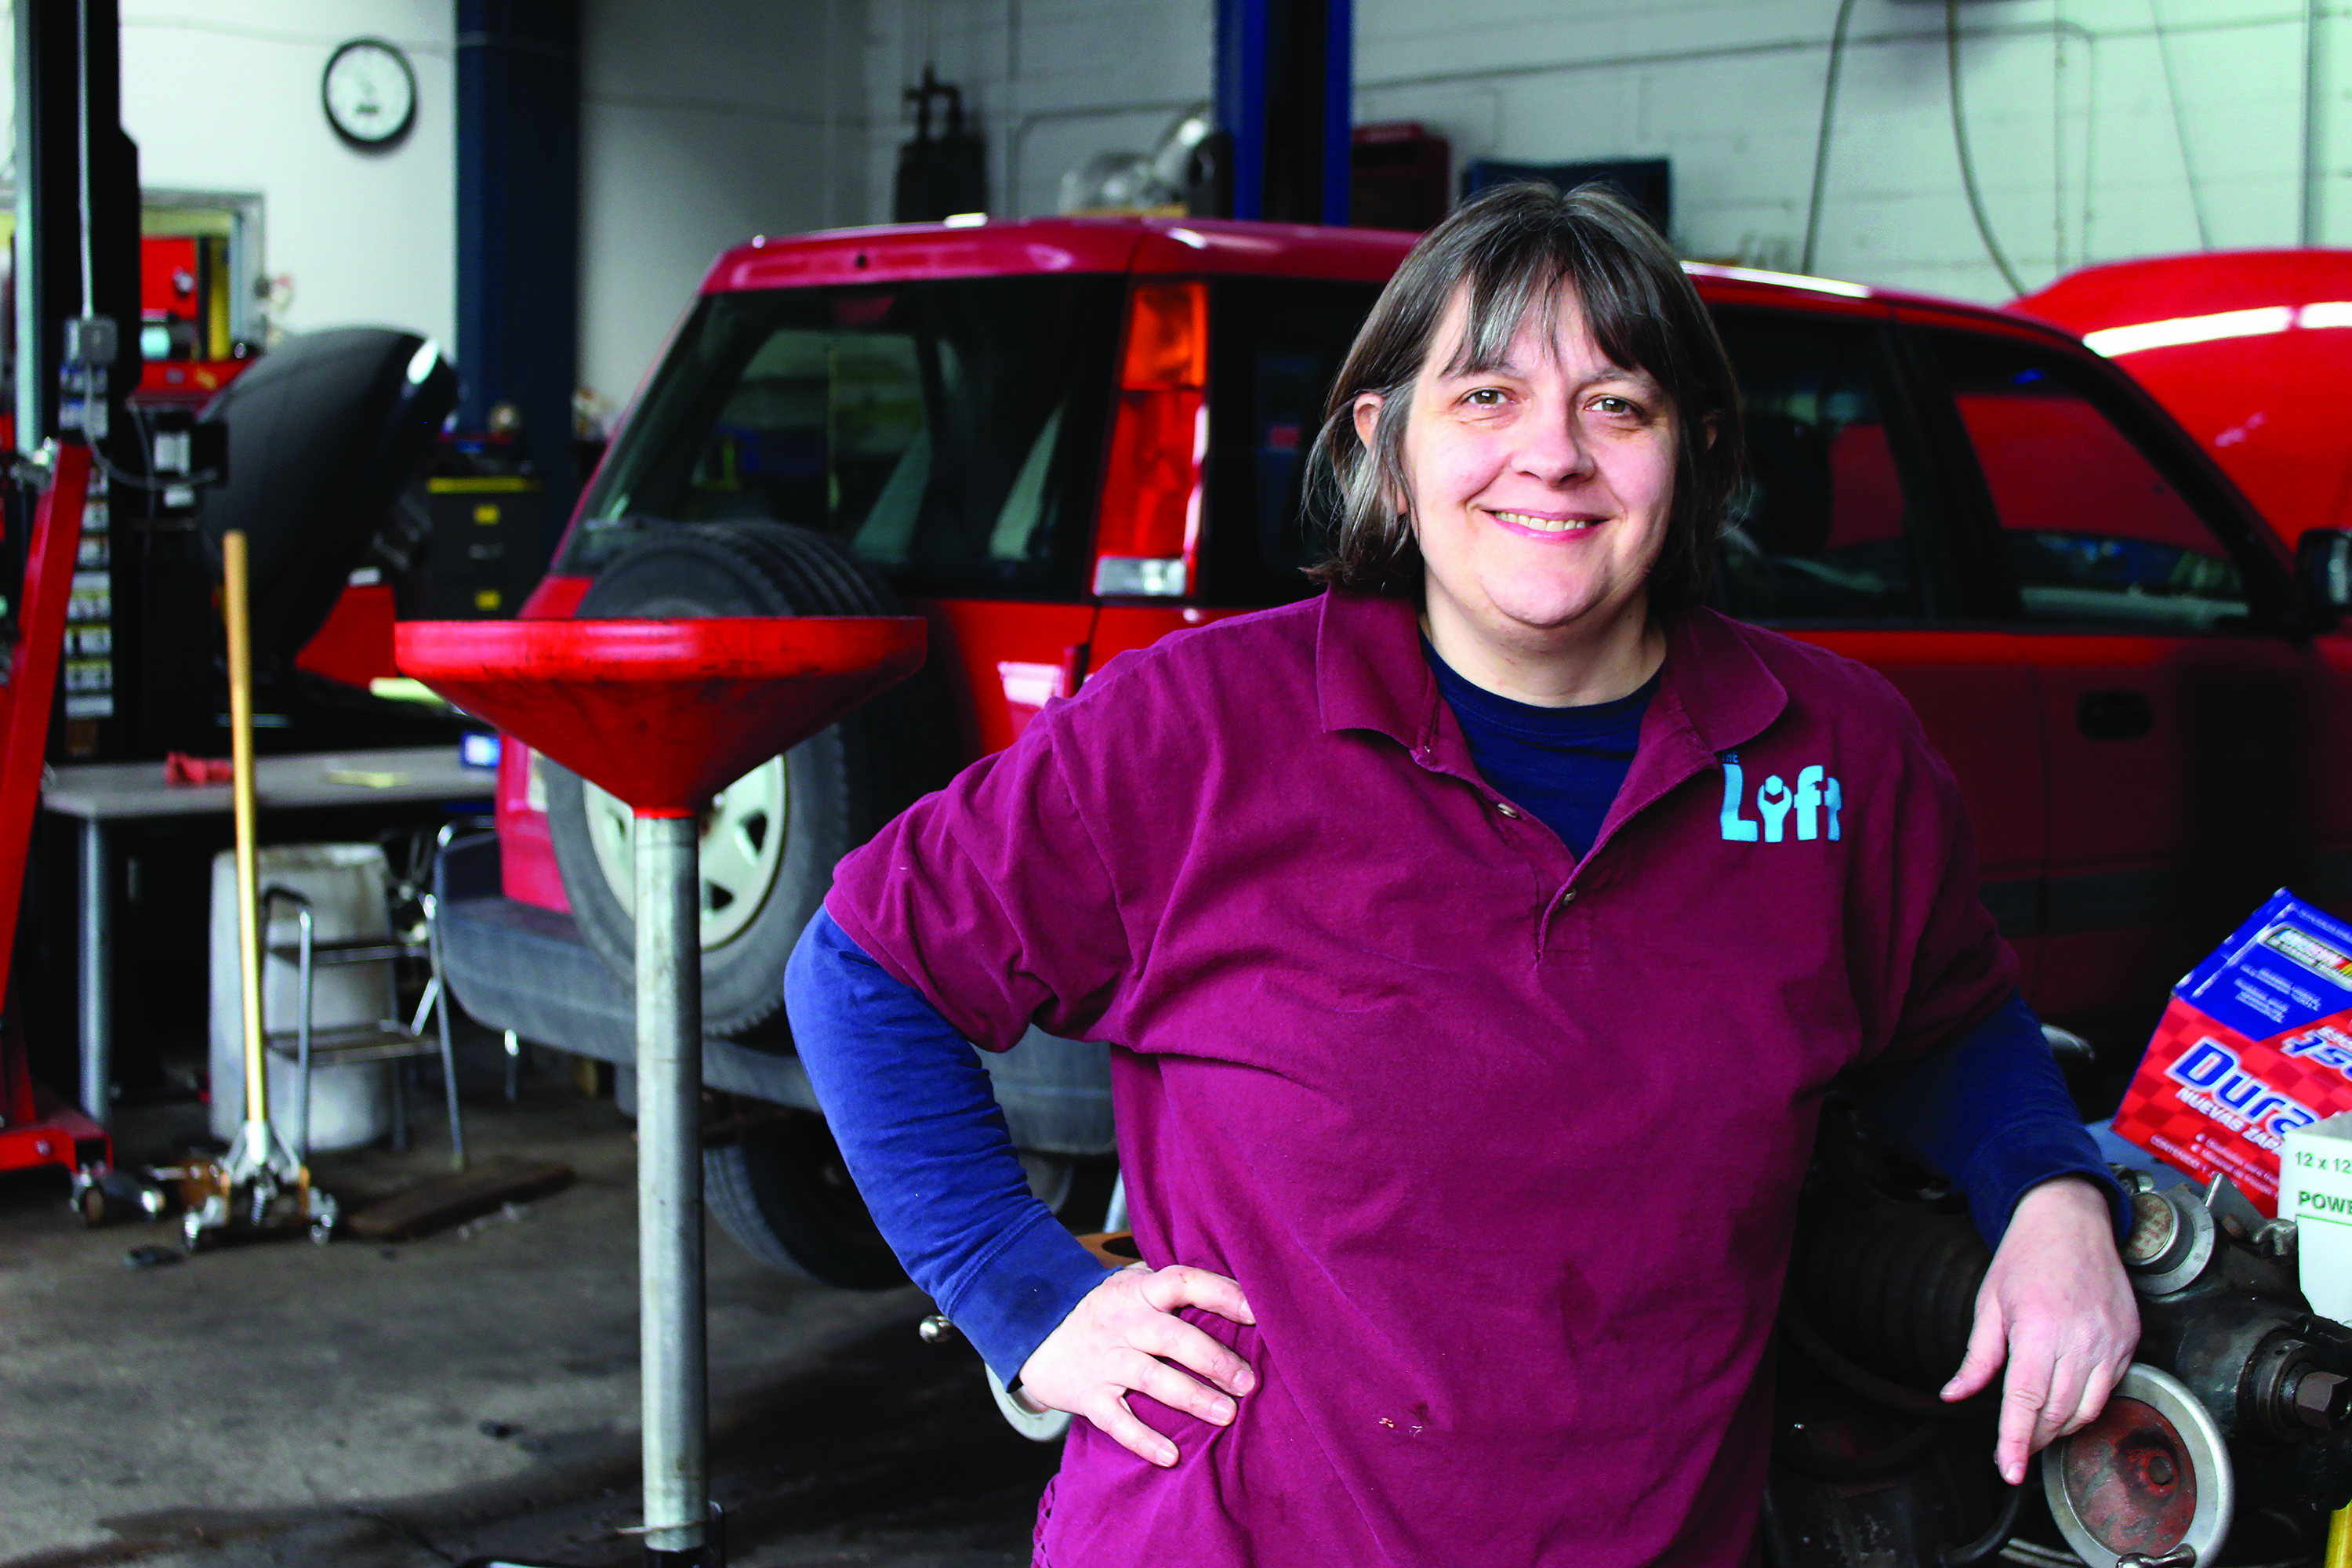 Cathy Heying, Dunwoody Alumni and founder of The Lift Garage, stands next to a car she is repairing. Headshot.